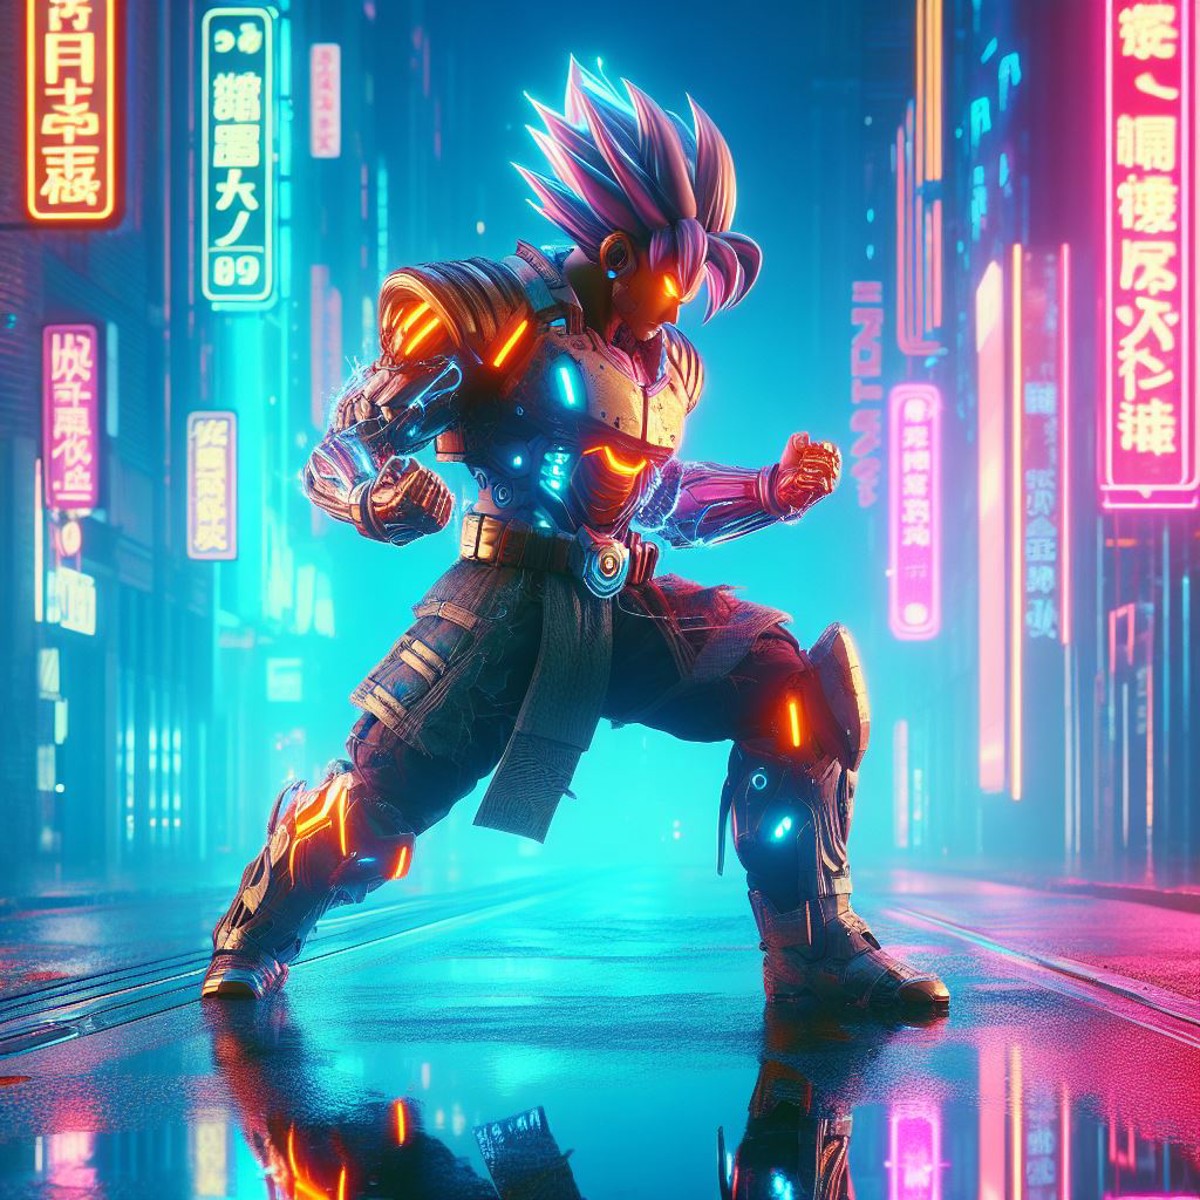 son goku wearing the armor of a cyberpunk soldier, cybernetic enhancements, cyberpunk soldier, charging his chi, power pos...